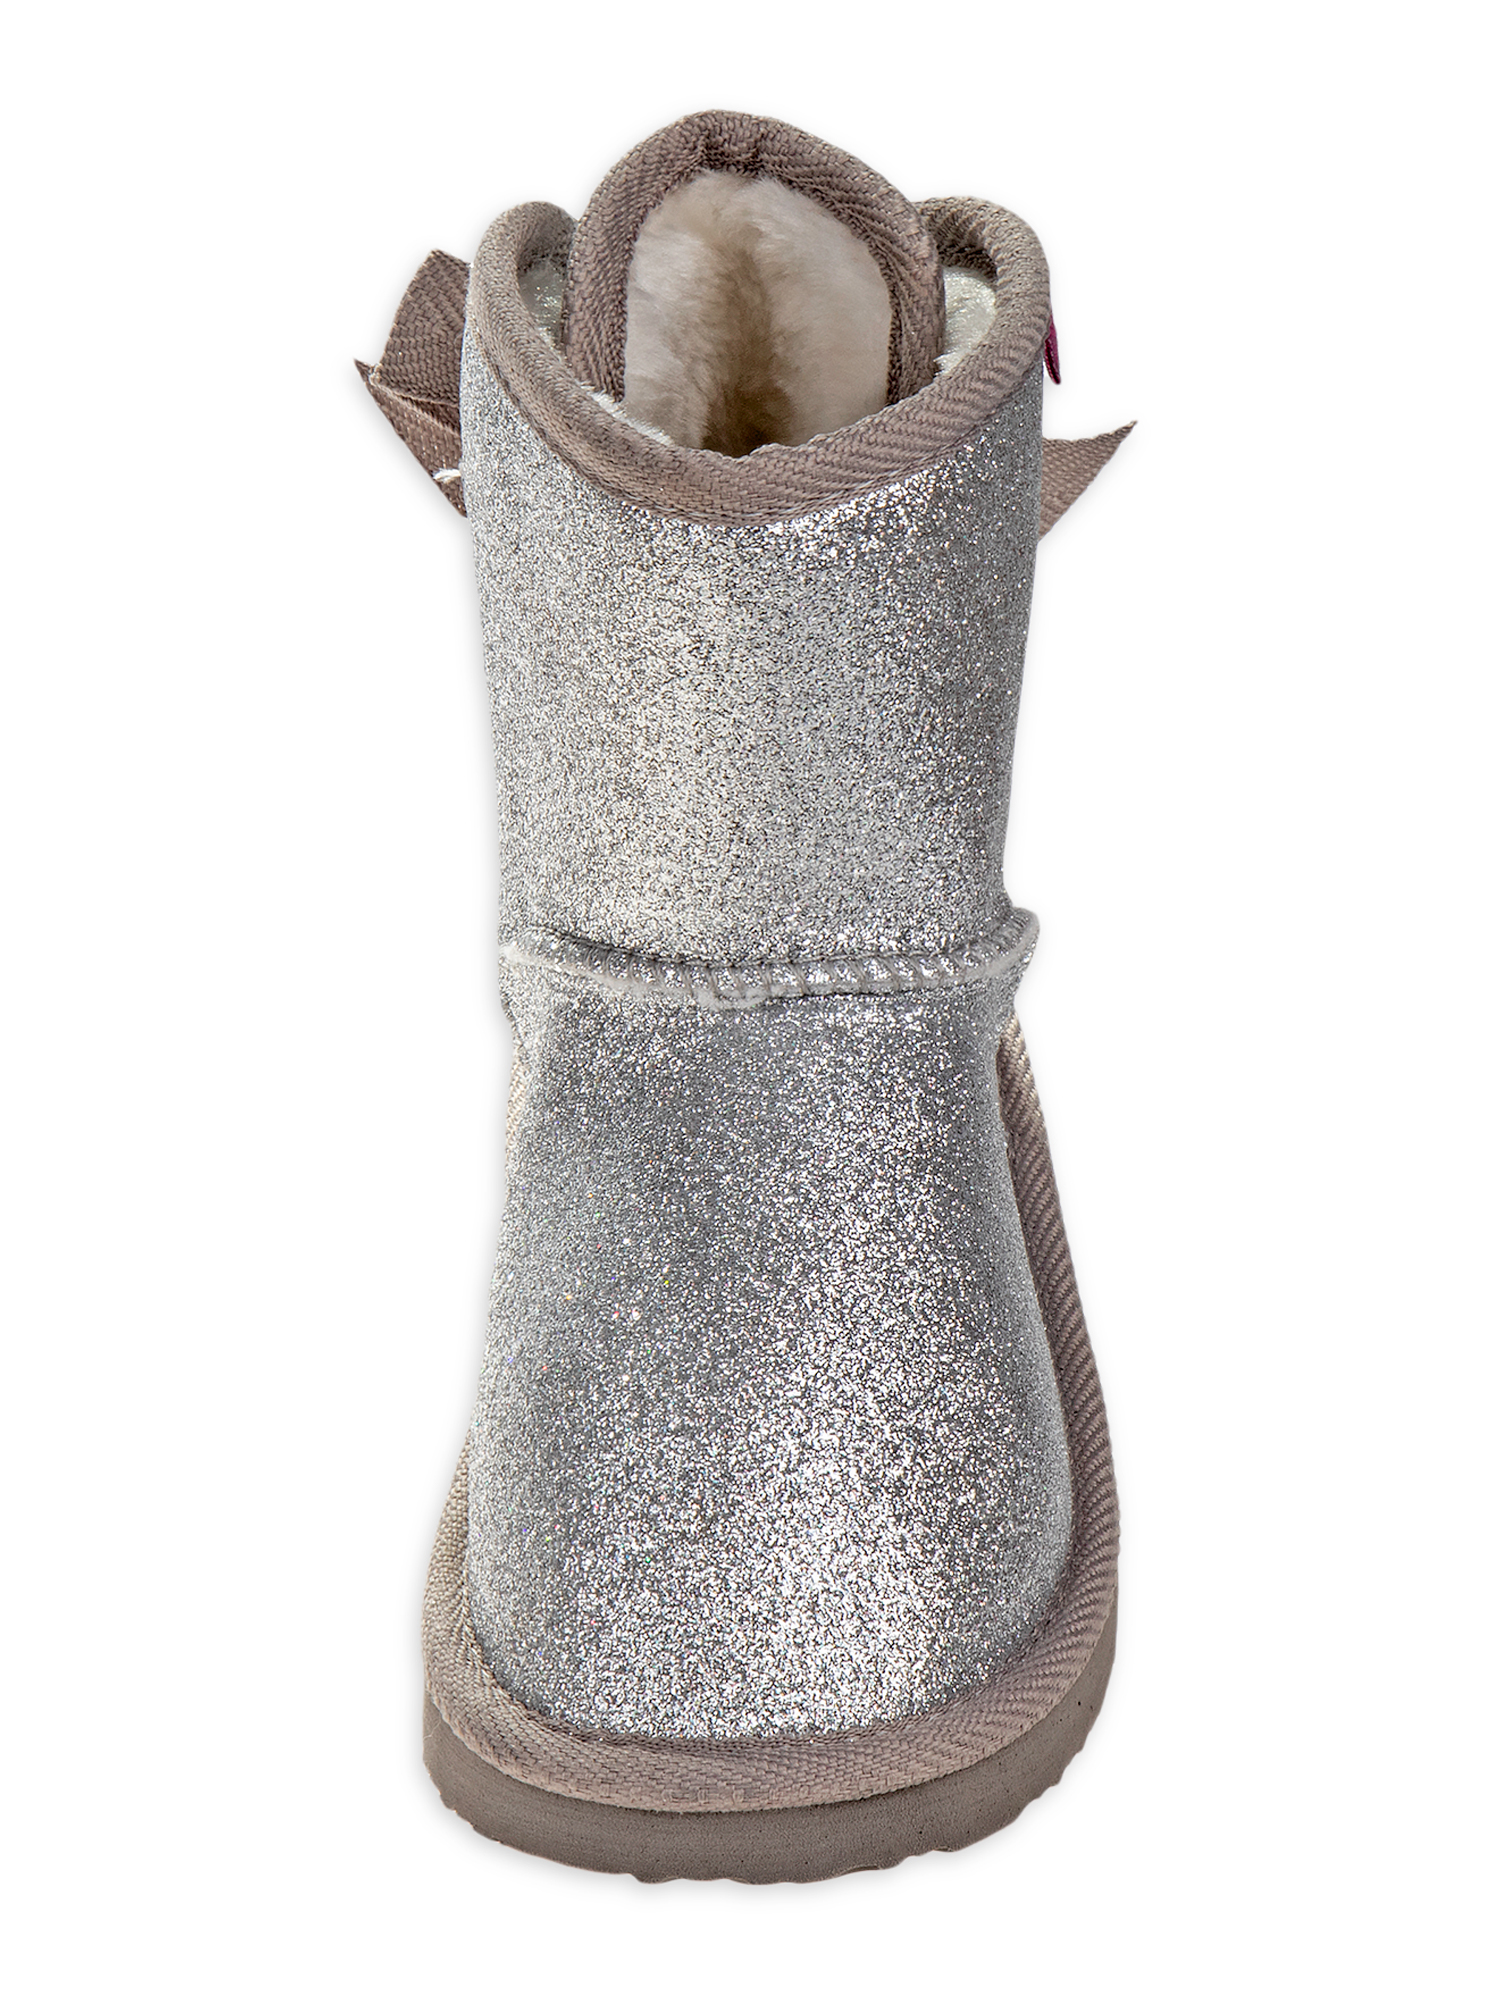 Josmo Glitter & Bows Faux Shearling Ankle Boot (Toddler Girls) - image 4 of 5